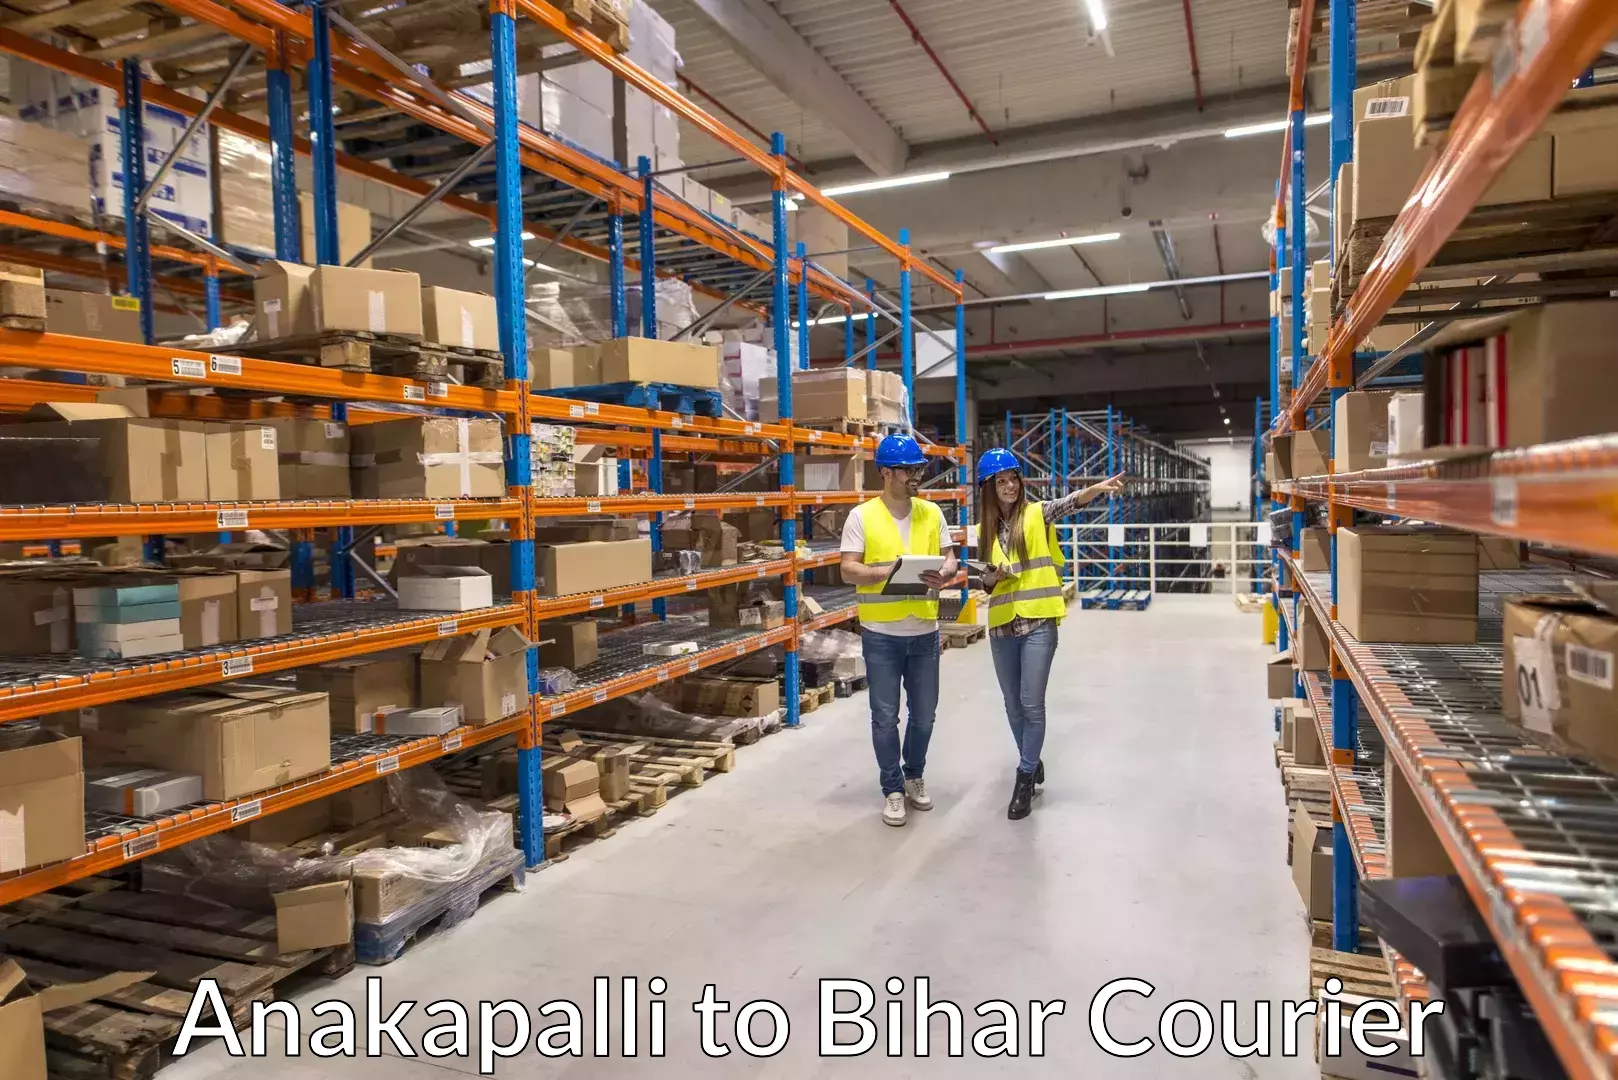 Tailored relocation services in Anakapalli to Bhorey